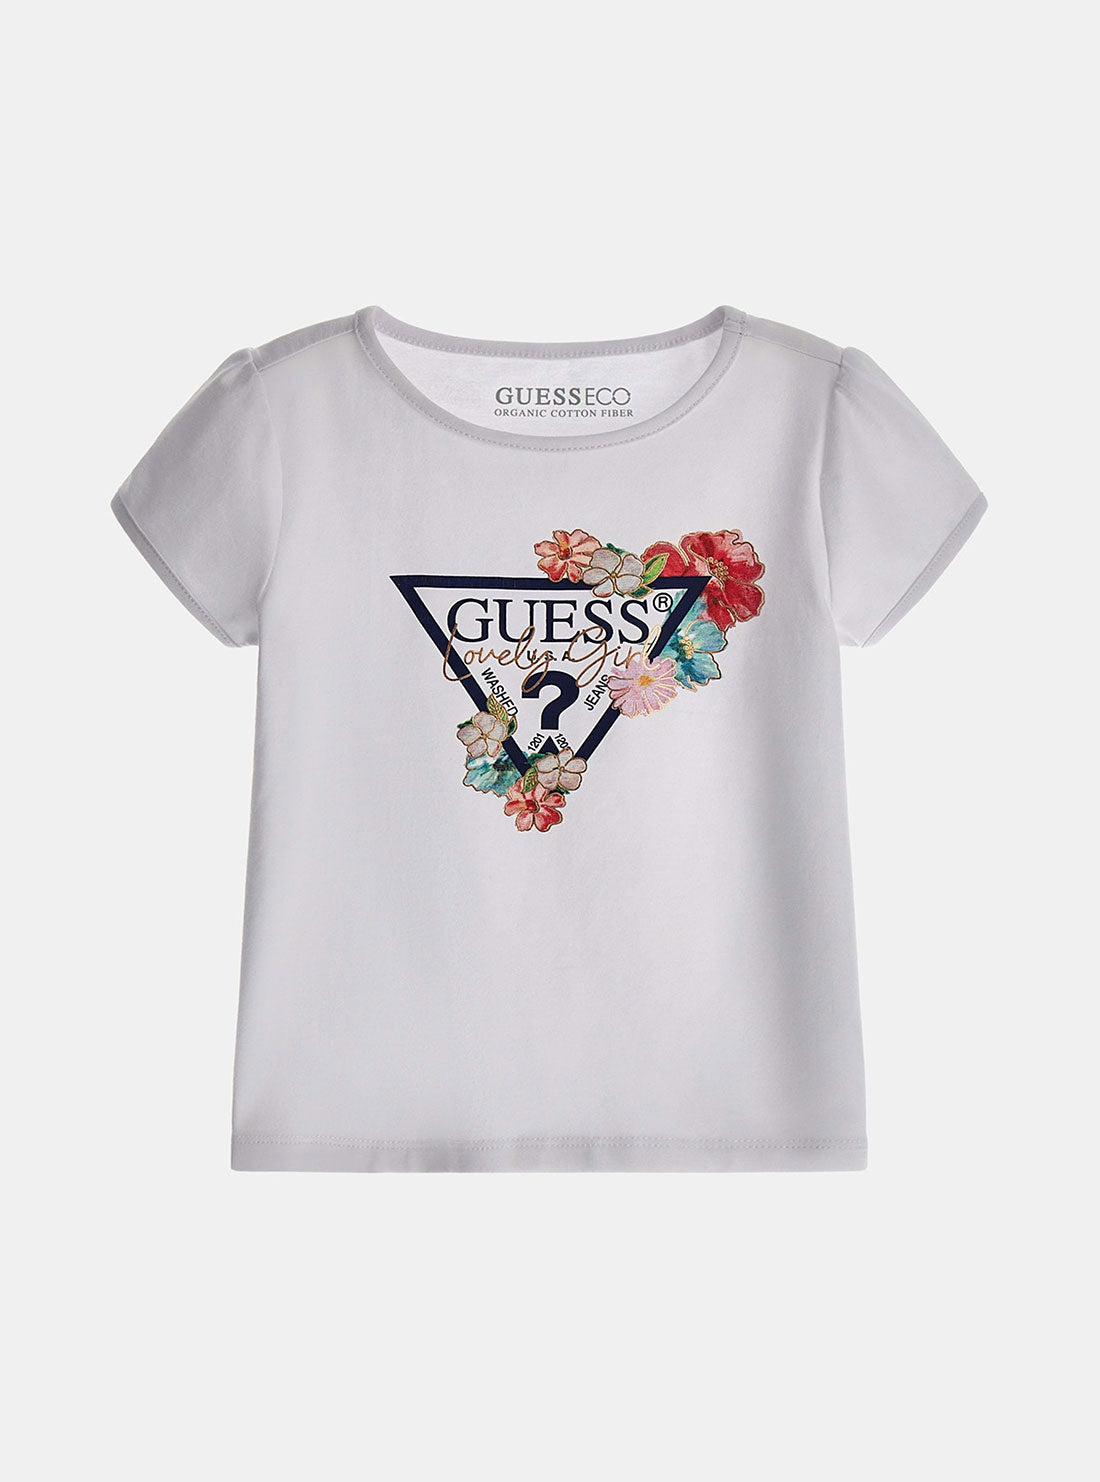 GUESS White Short Sleeve T-Shirt (2-7) front view